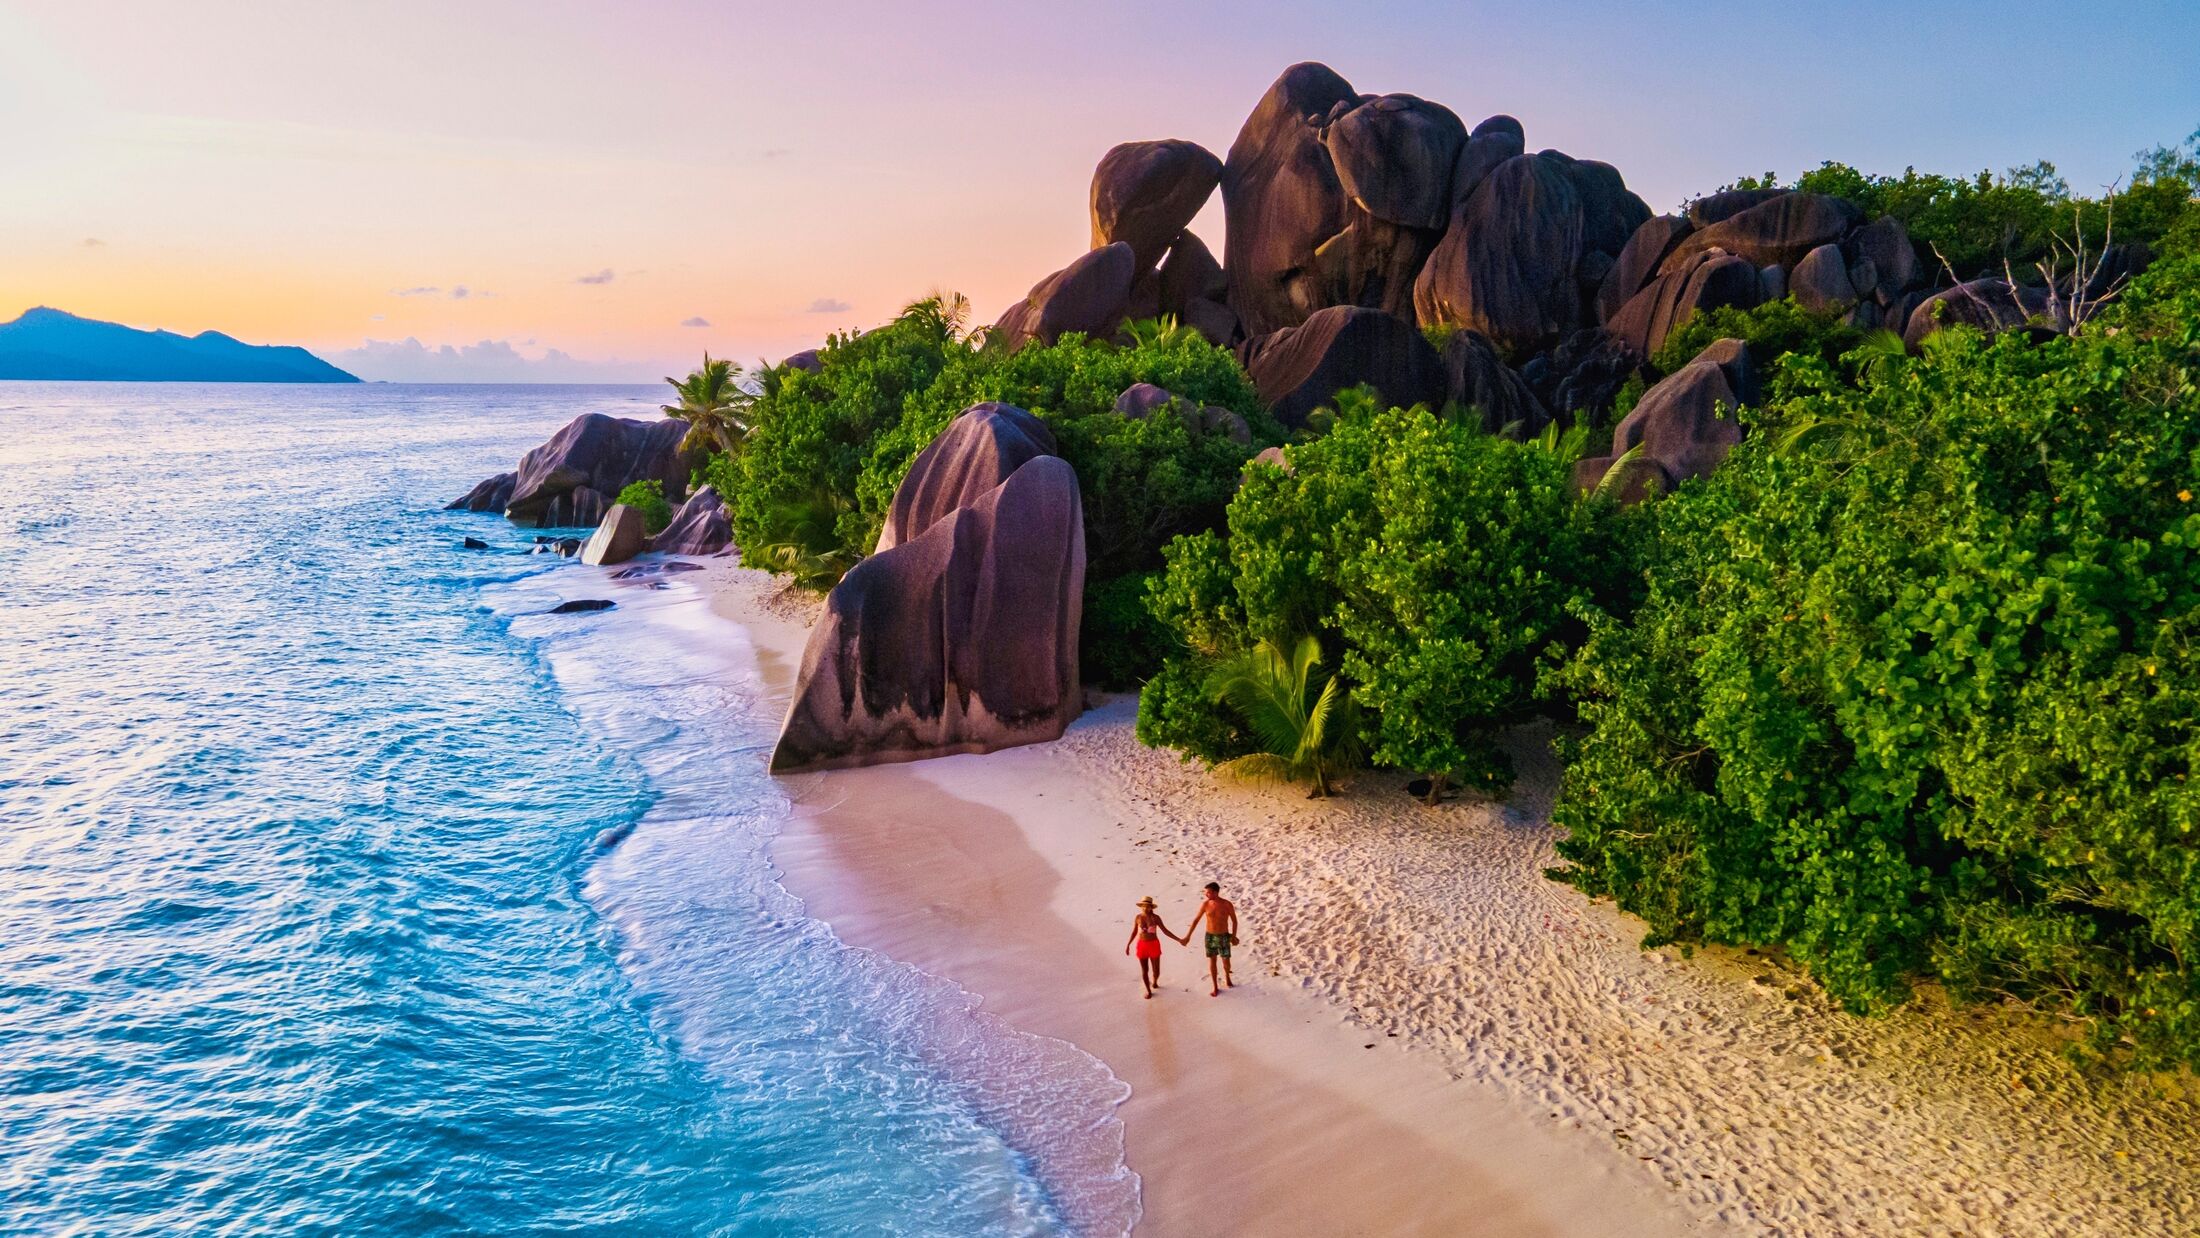 Anse Source d'Argent beach, La Digue Island, Seyshelles, Drone aerial view of La Digue Seychelles bird eye view.of tropical Island, couple men and woman walking at the beach during sunset at a luxury